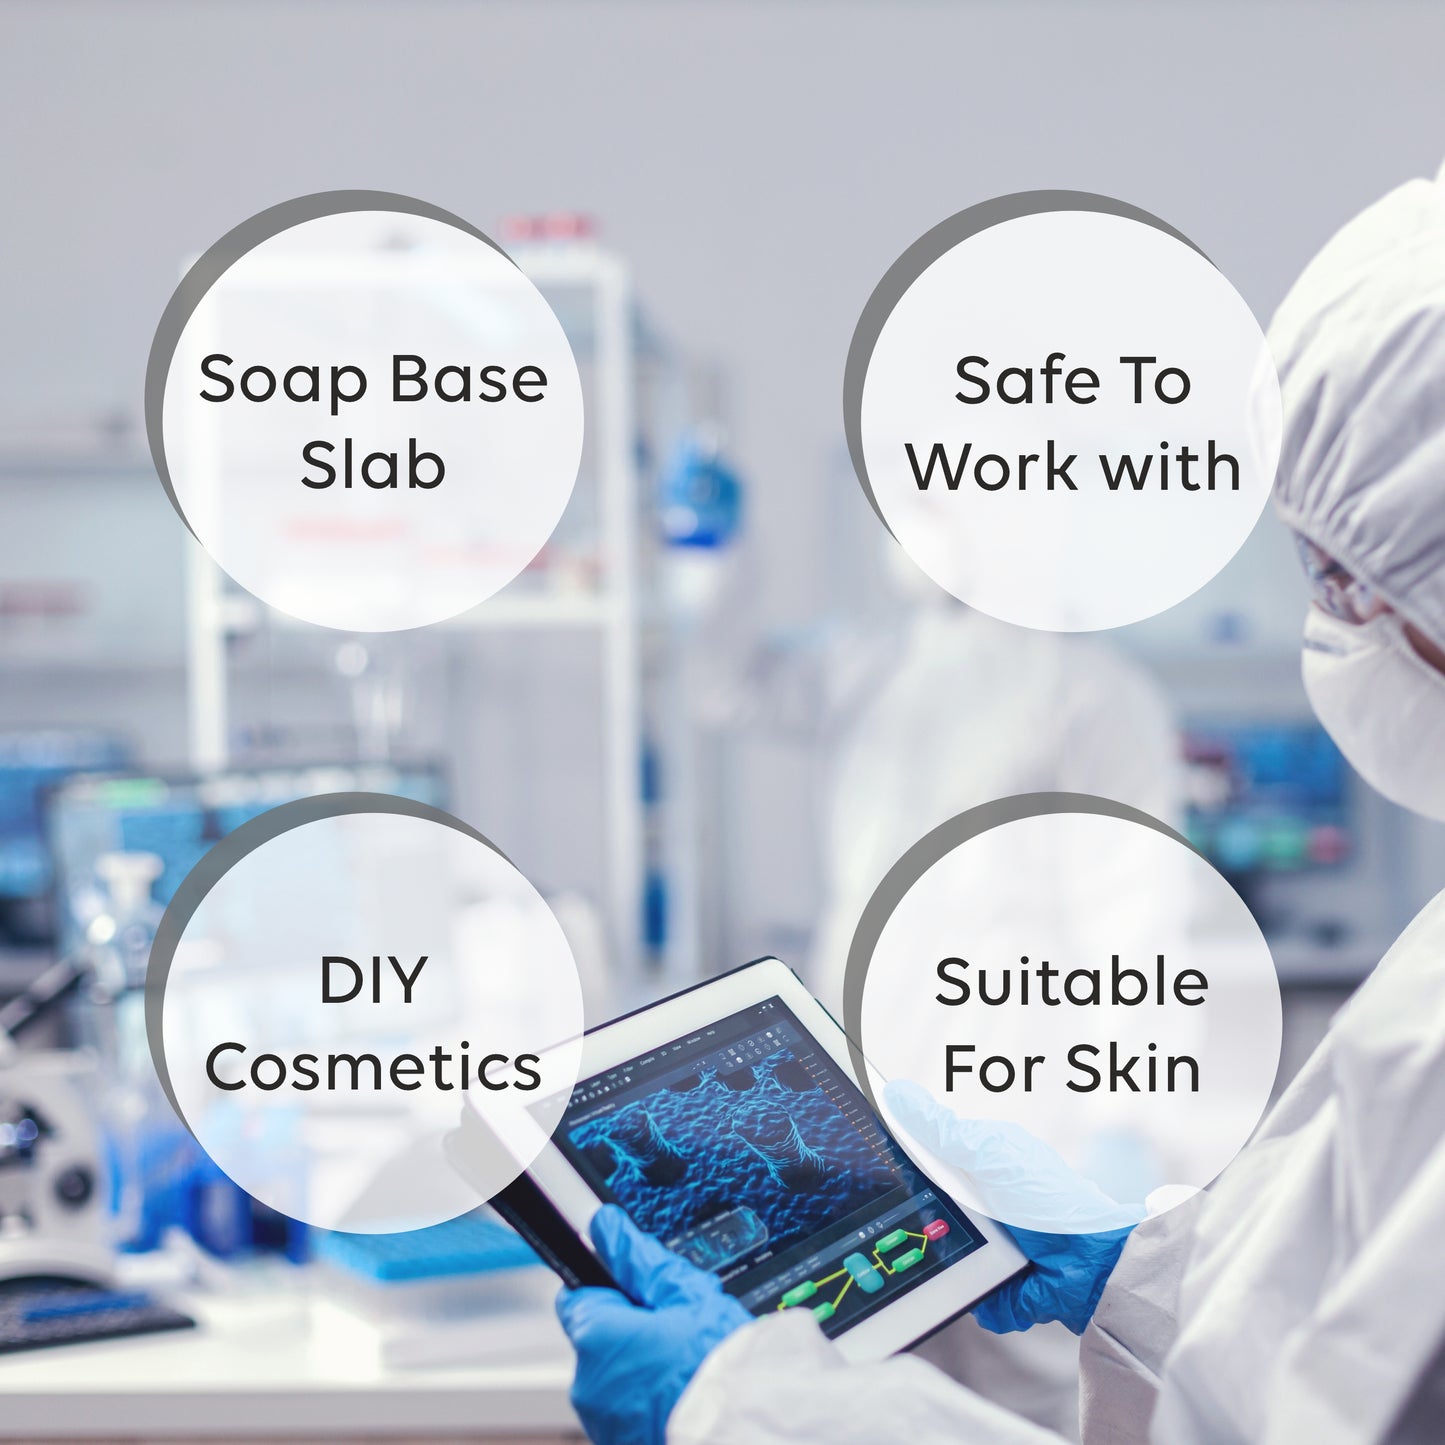 cosmeticmaking, saopmaking, cosmeticmakingingredients, soapmakingingredients,cosmeticingredients,naturalingredients,organicingredients,veganingredients, essentialoils,fragranceoils,carrieroils, carrieroils, butters, clays,botanicals,herbs,preservatives,emulsifiers,surfa ctants,thickeners, thickeners,exfoliants,Activated charcoal, charcoal base soap